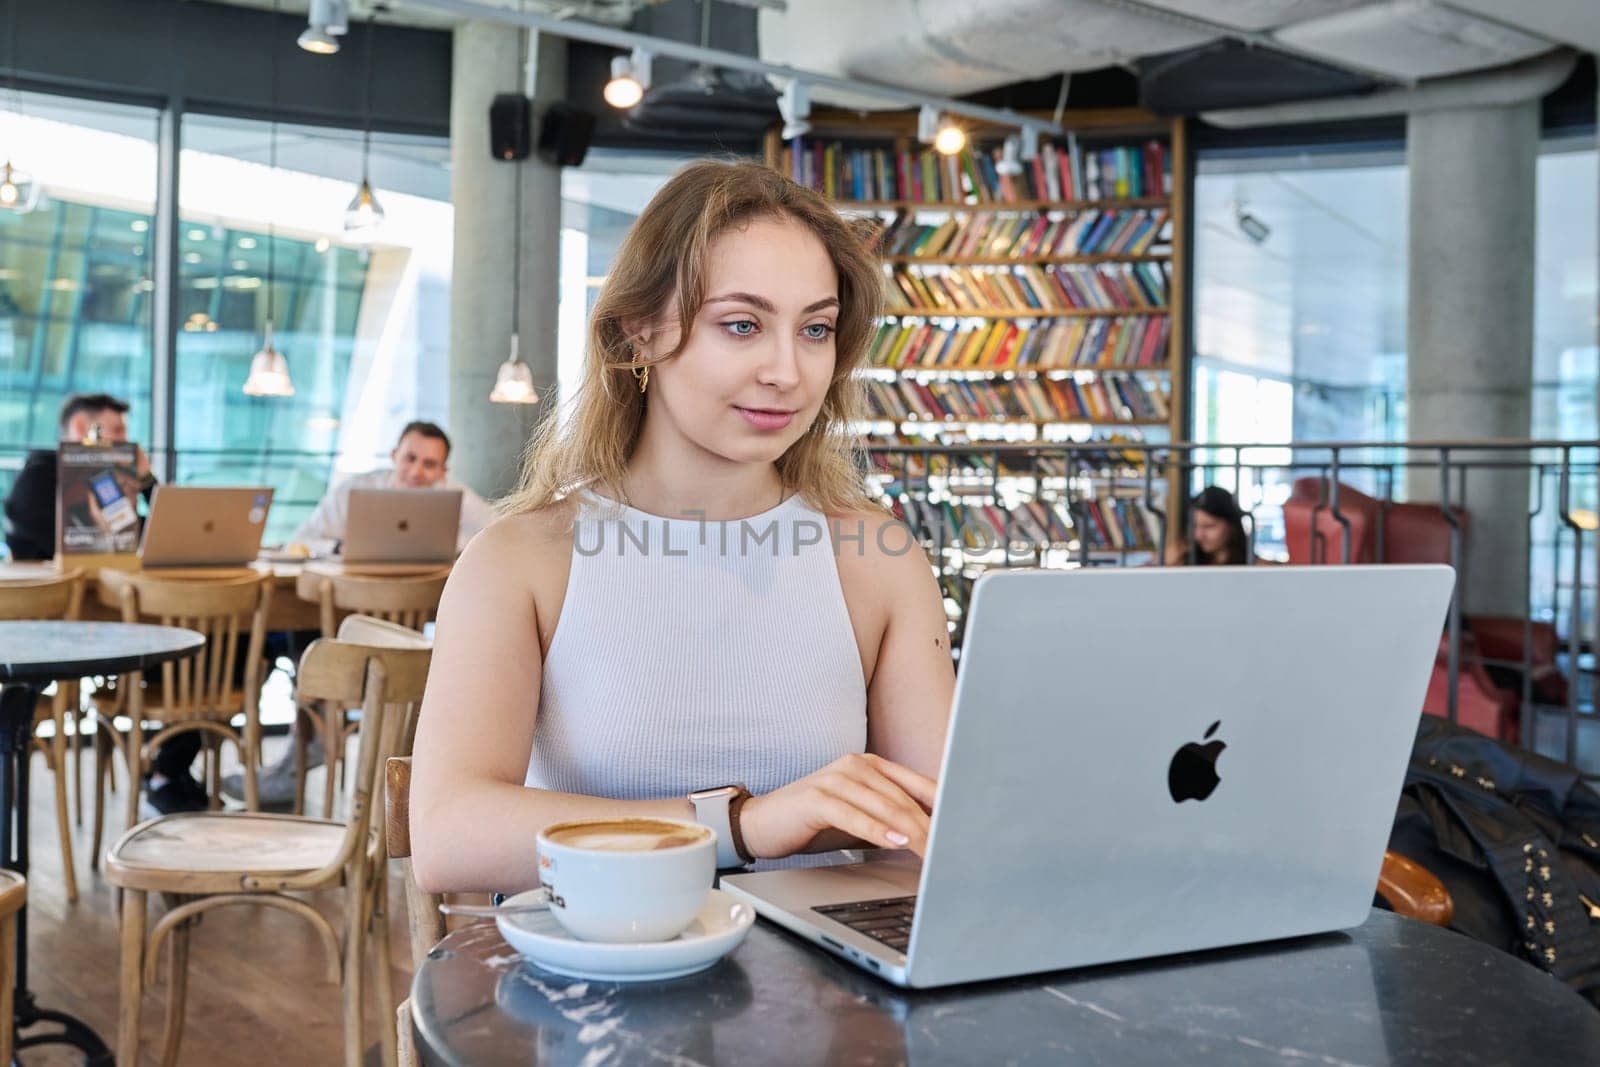 Warsaw, Poland, 12.05.2023. Beautiful girl inside cafe with cup of coffee using laptop. Attractive young blonde woman with curly hair working studying in cafe. Beauty, youth, lifestyle concept